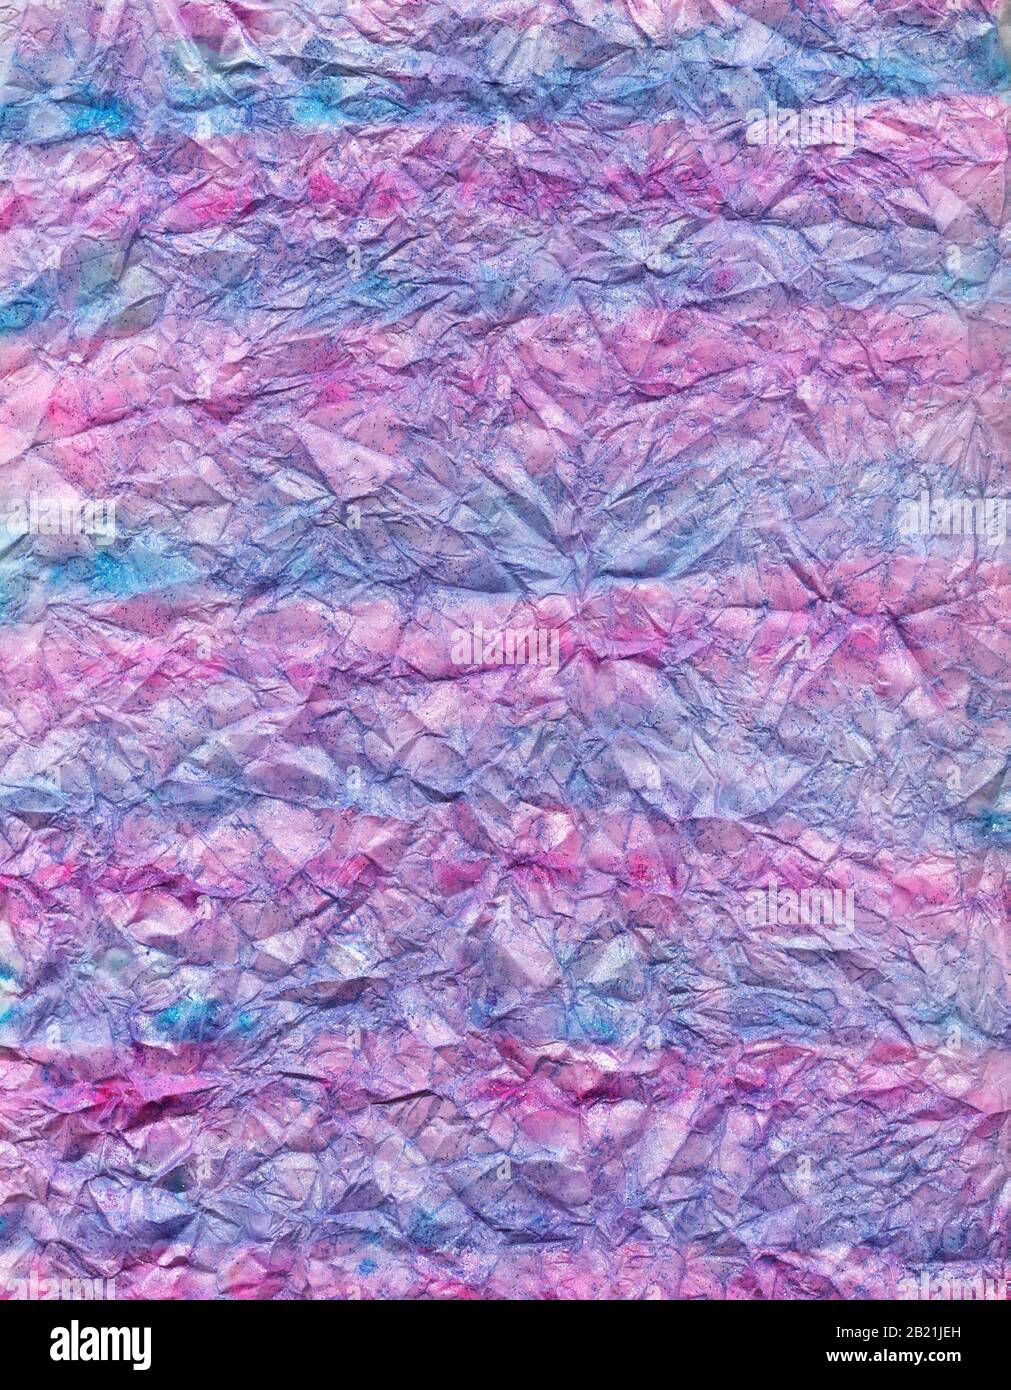 Hand painted blue and pink colored metallic paper. This is a high resolution scan showing all the detail. Stock Photo